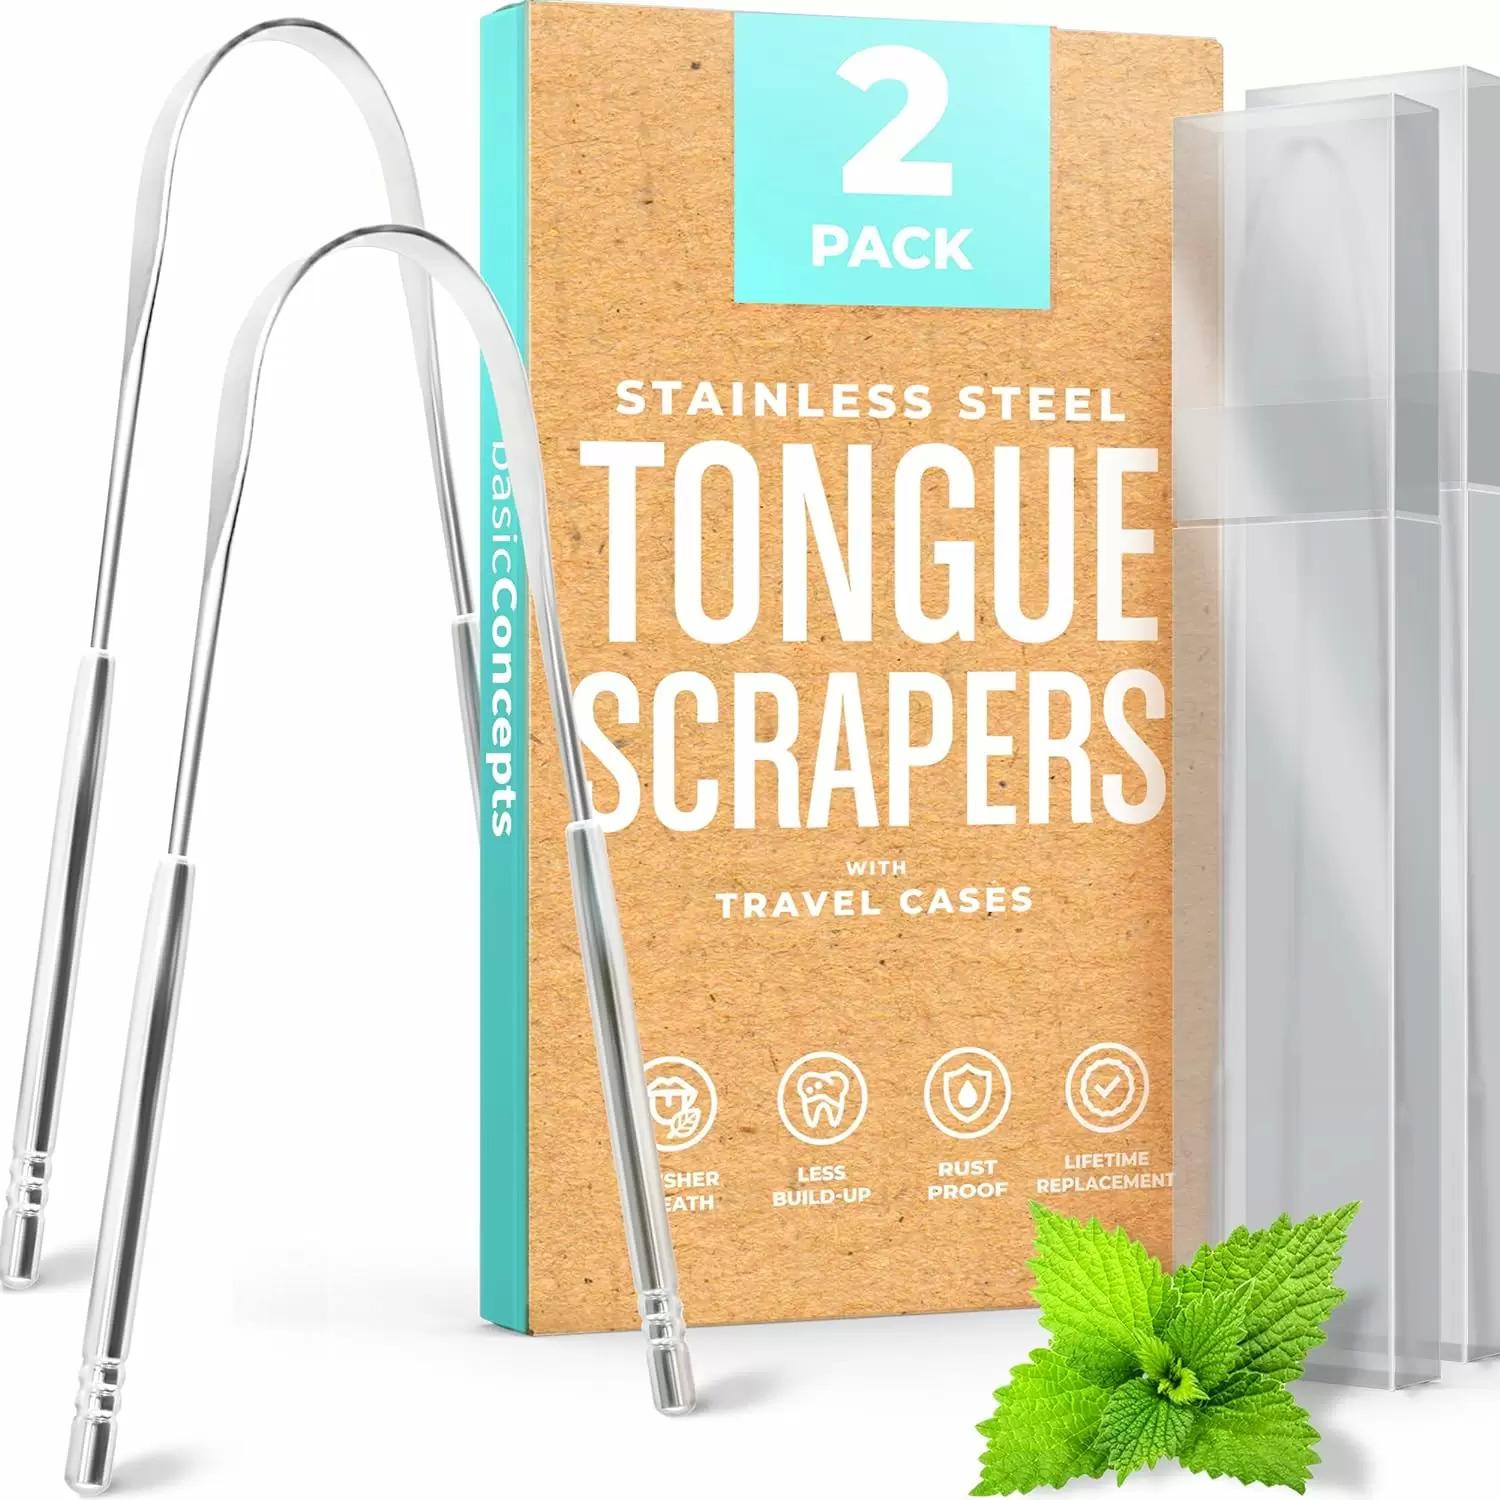 Tongue Scraper for Adults 2 Pack for $3.97